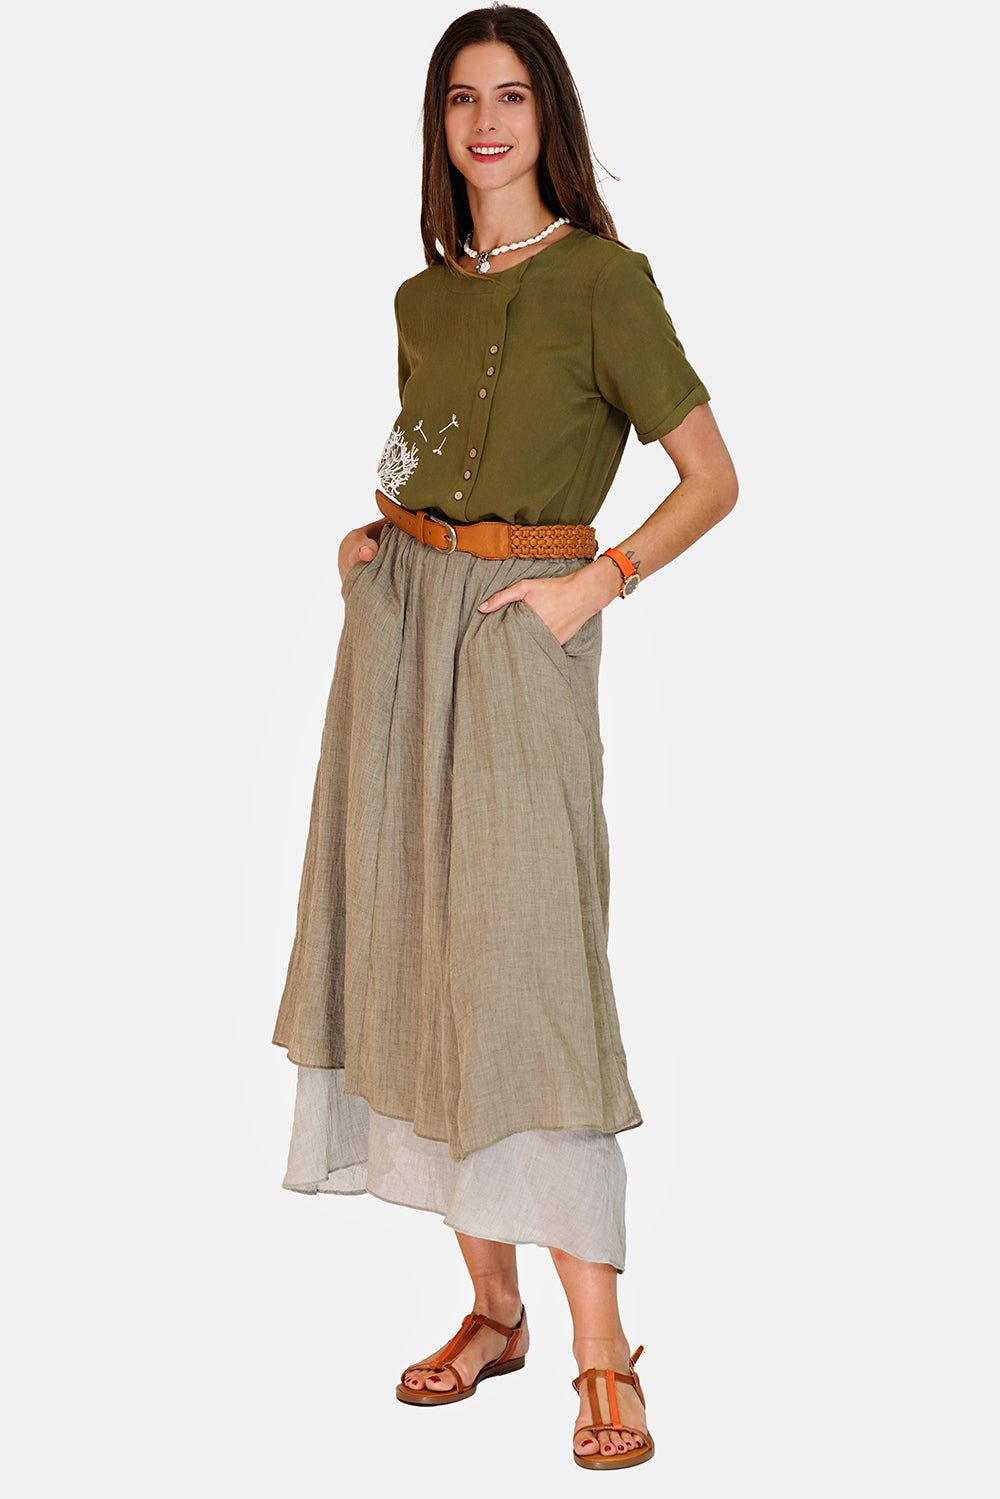 Long skirt with front pockets lined in bi-color